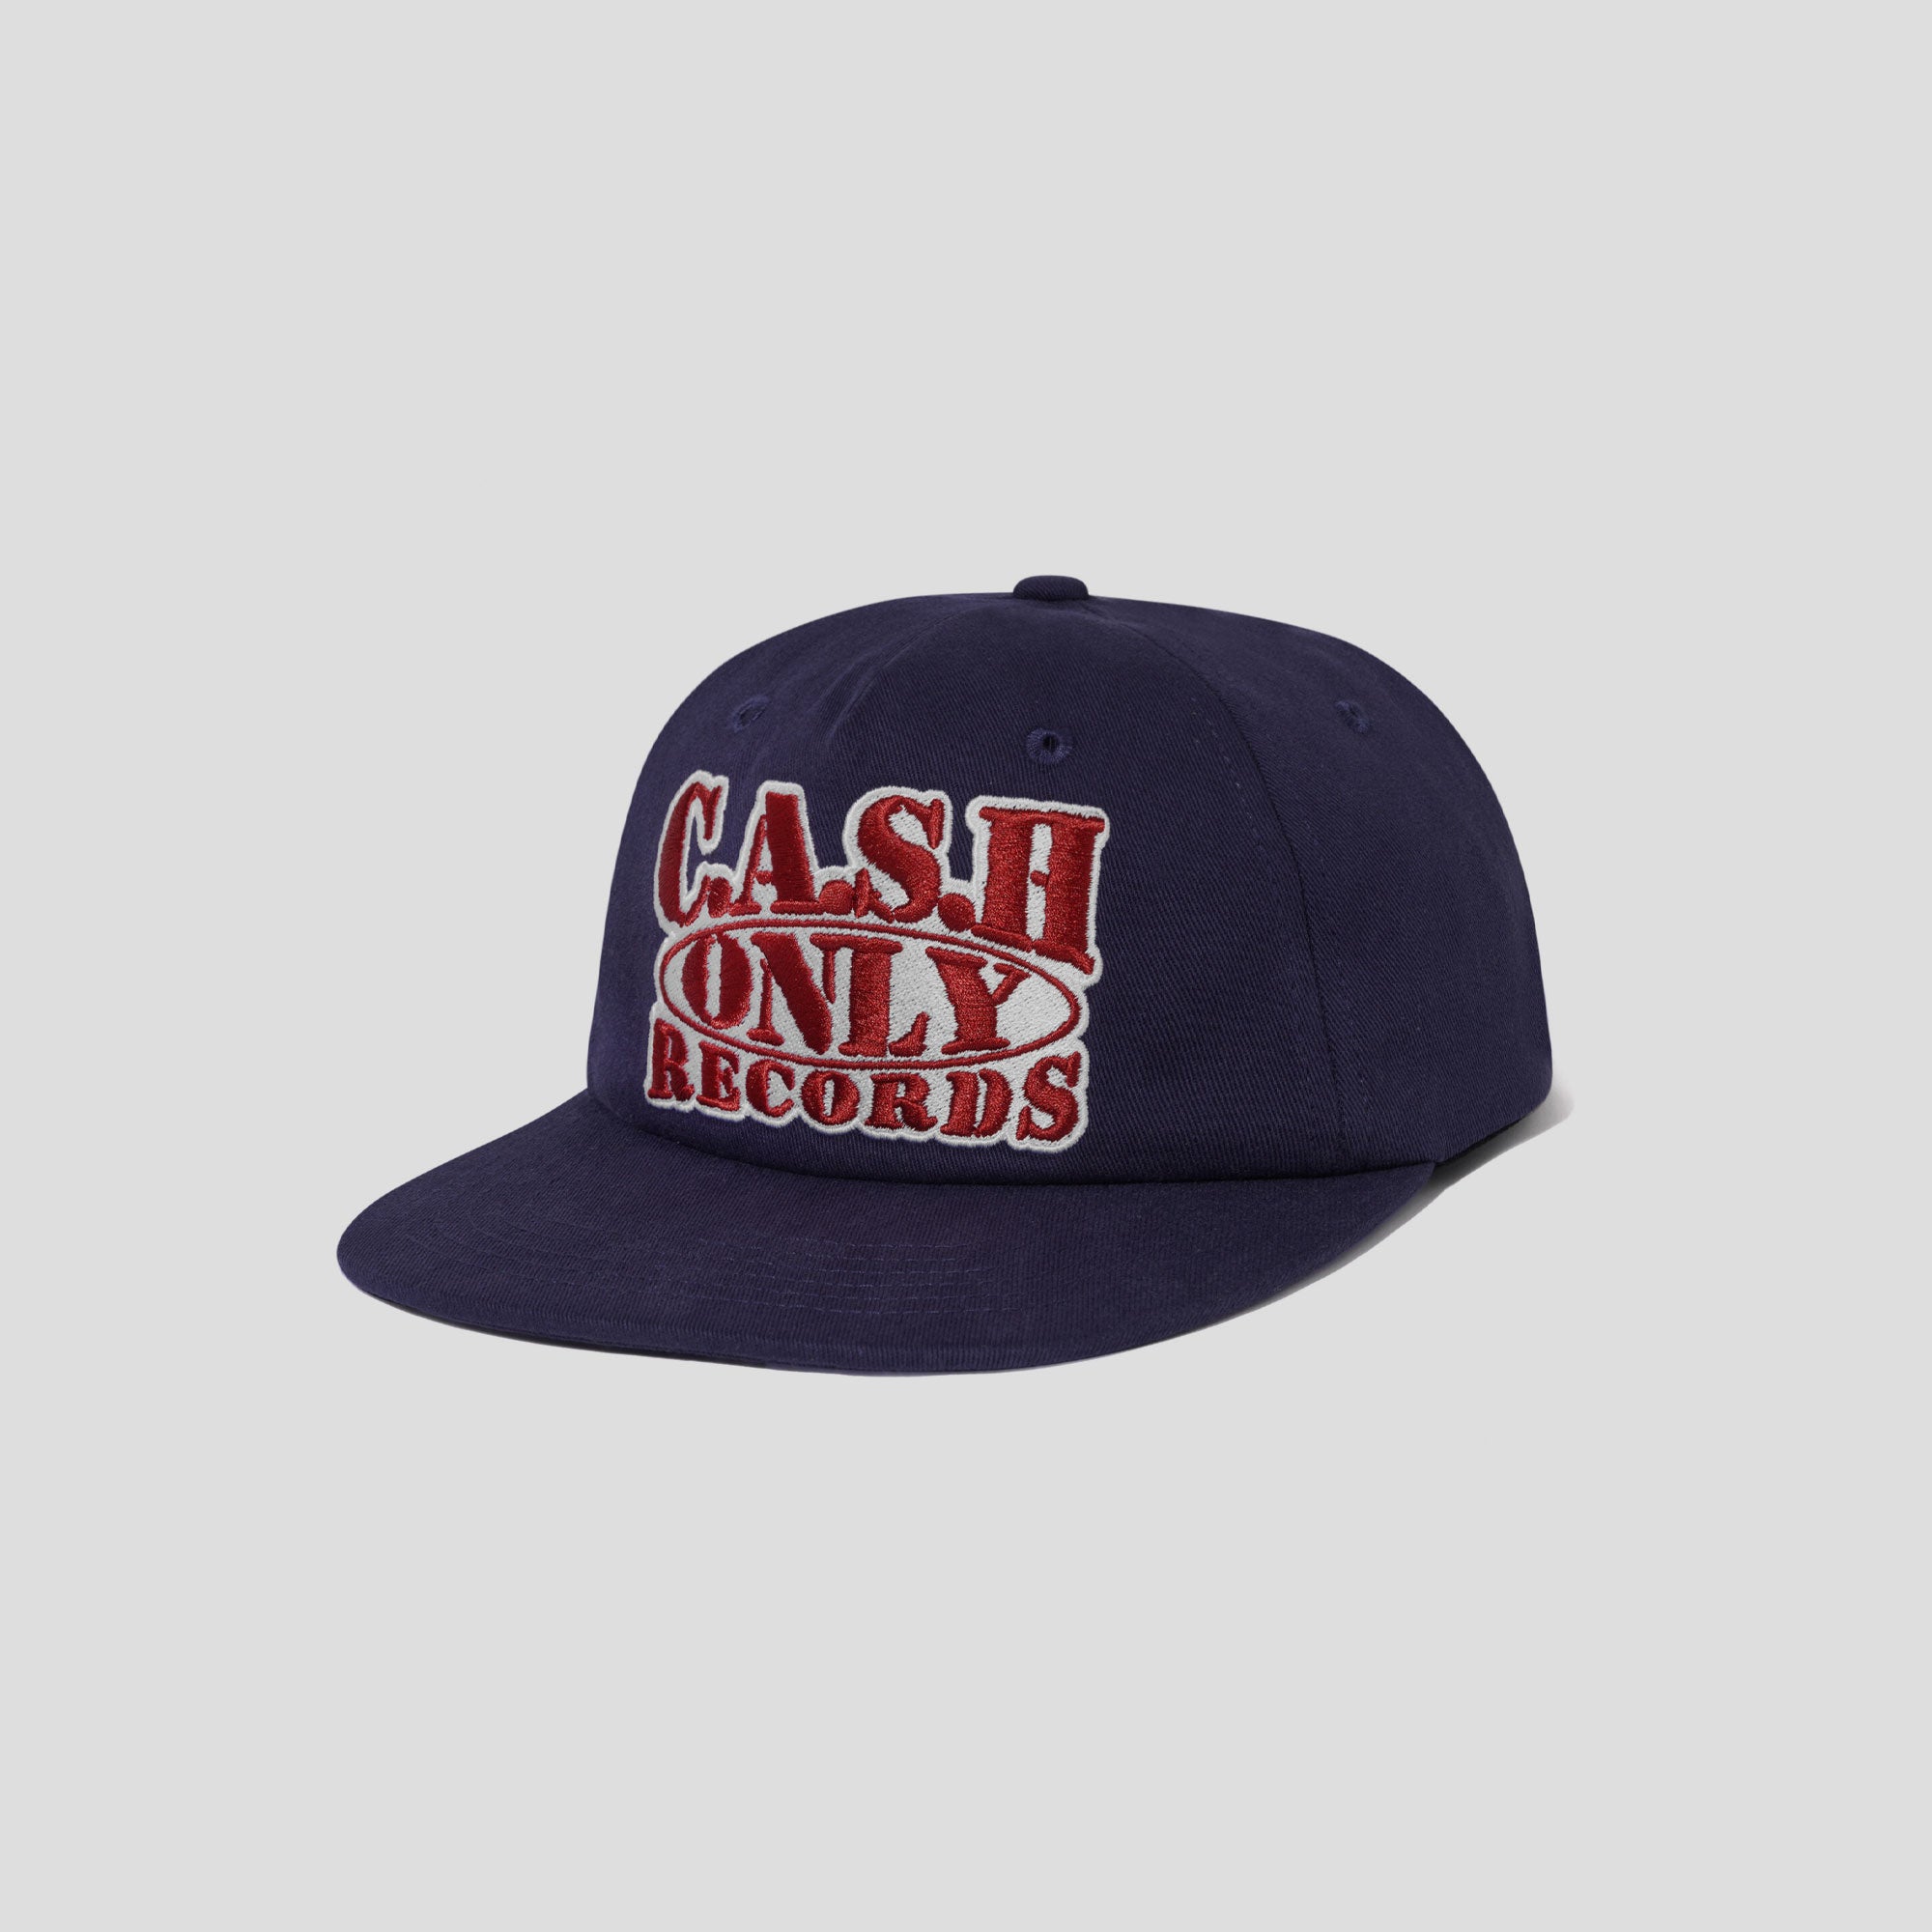 Cash Only Records 5 Panel Cap - Navy